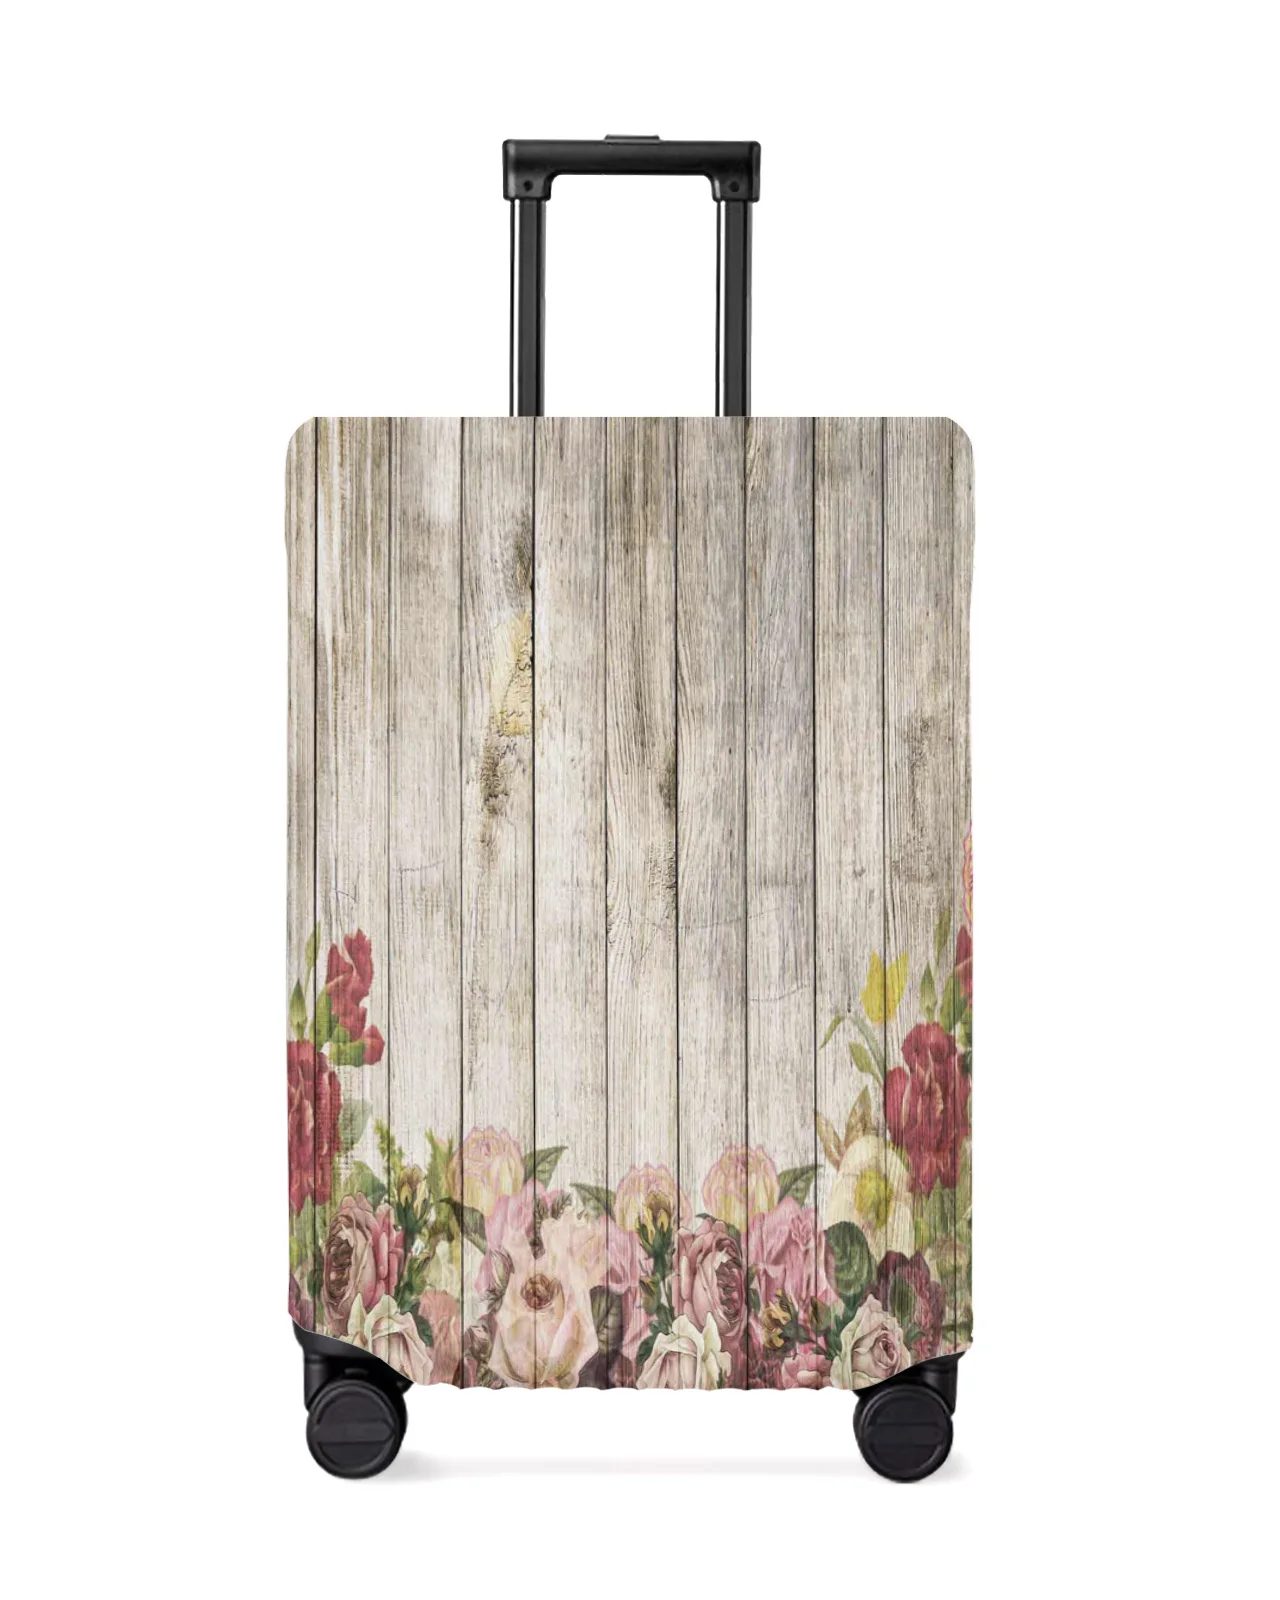 wood-grain-flower-retro-travel-luggage-protective-cover-for-travel-accessories-suitcase-elastic-dust-case-protect-sleeve